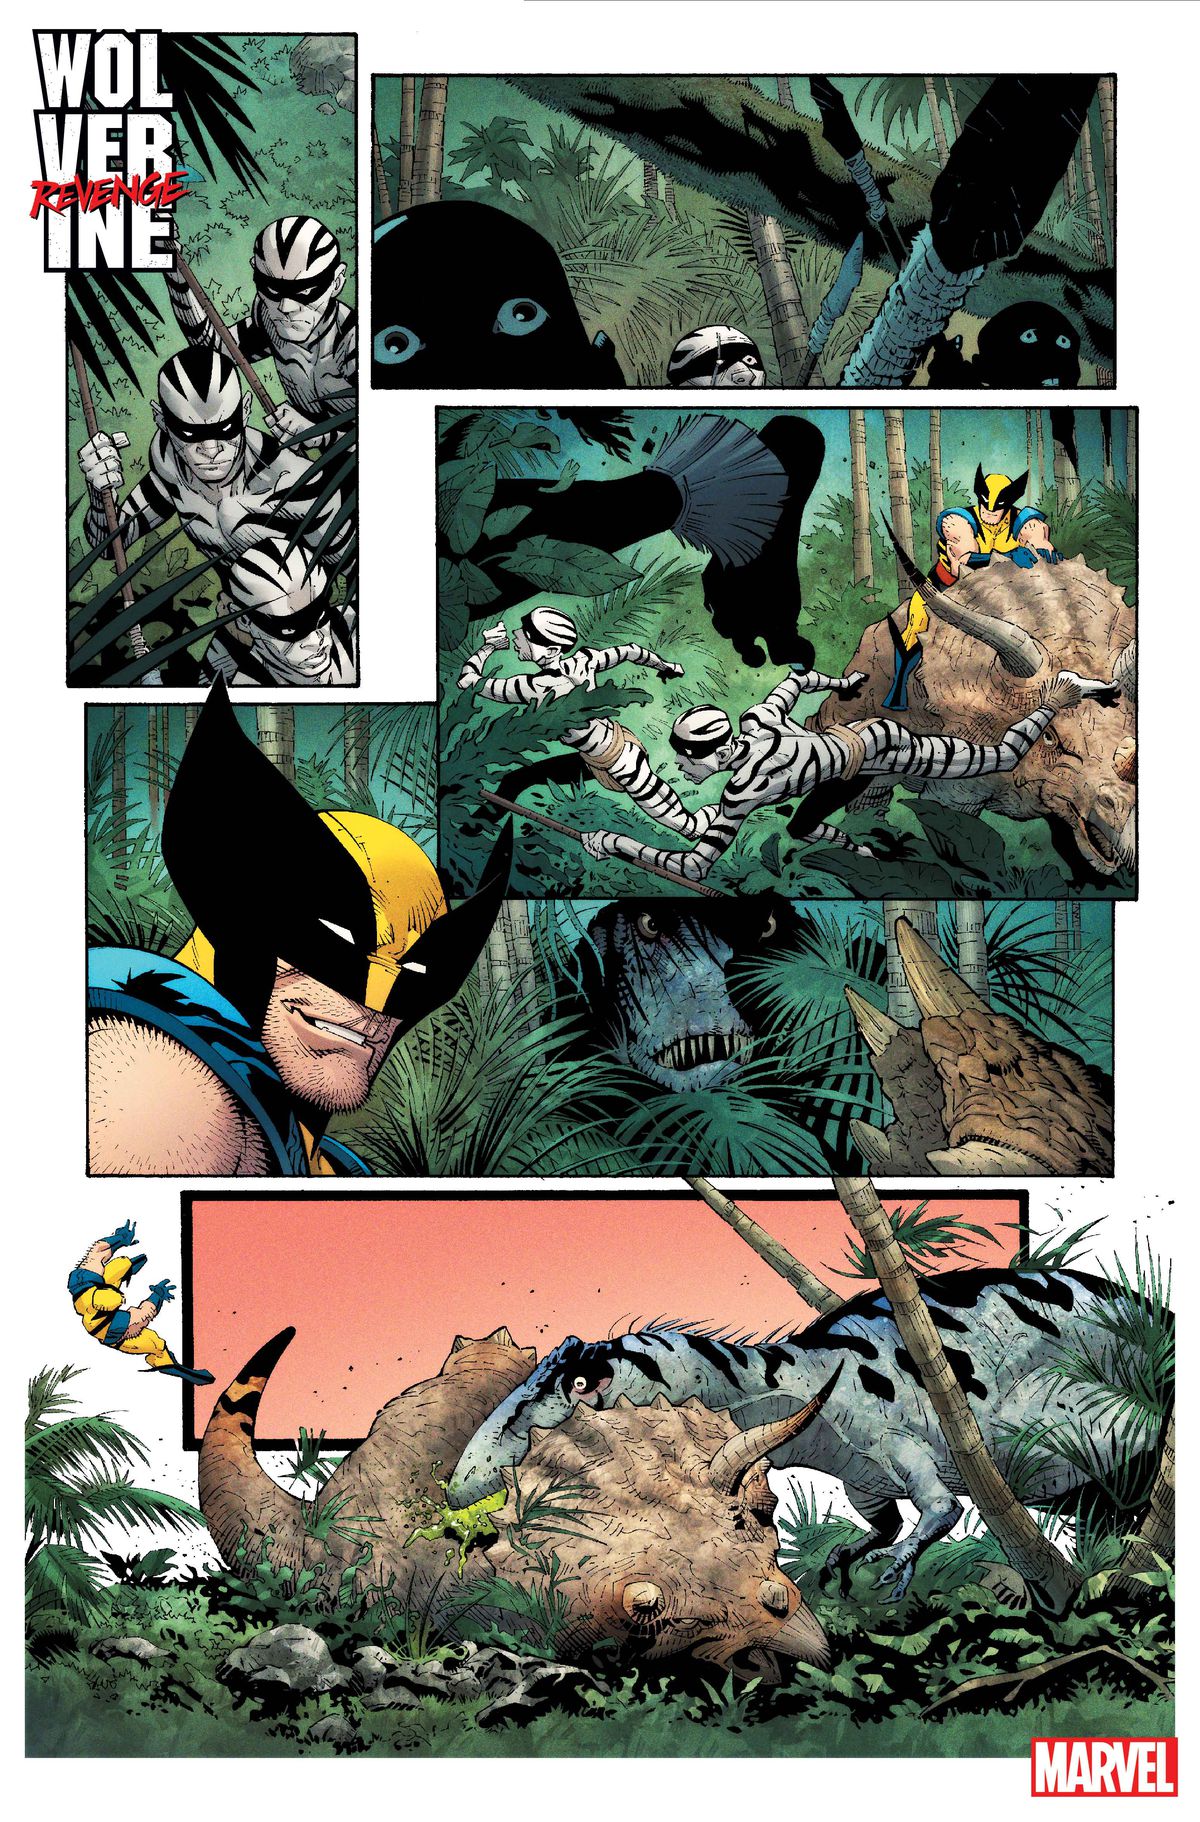 Zebra People flee as Wolverine watches, grinning, a huge theropod-type dinosaur leaps from hiding and takes down his ceratops mount, throwing him off, in Wolverine: Revenge #1.